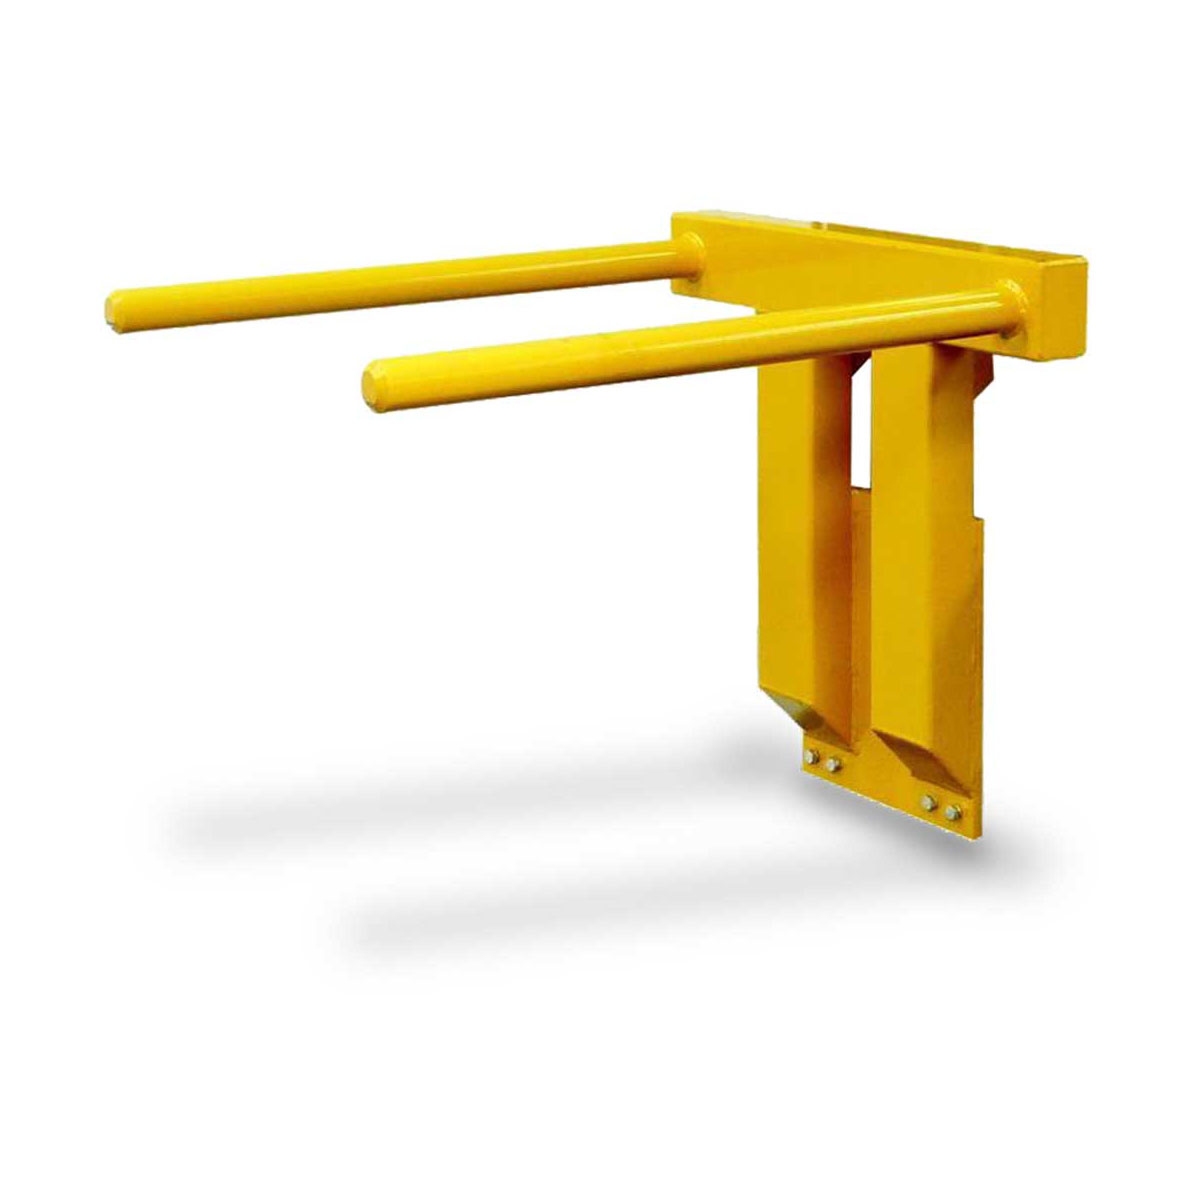 Buy Bulk Bag Prongs - Carriage Mount in Forklift Attachments from Astrolift NZ